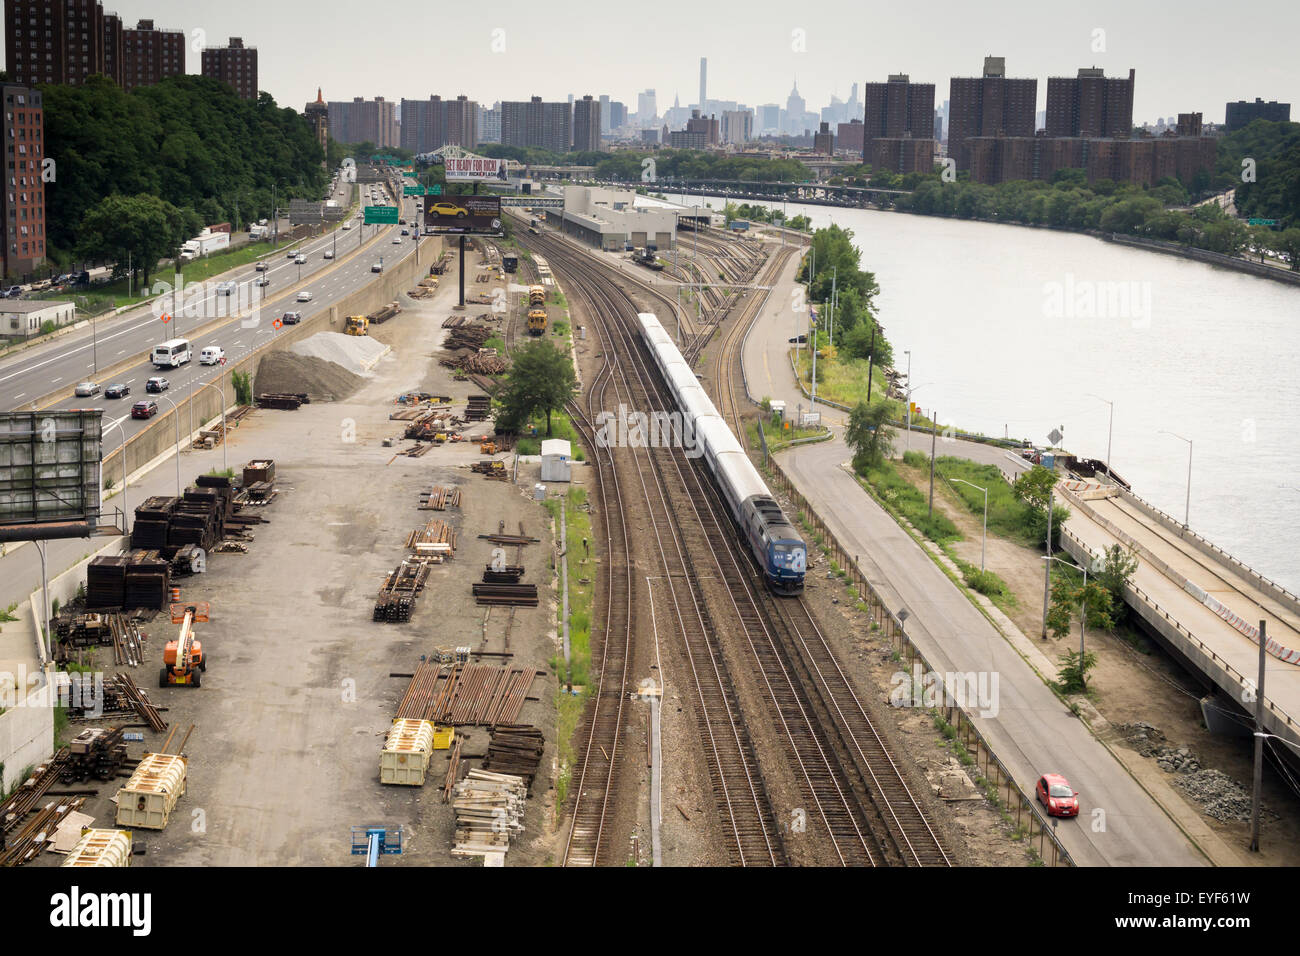 A Metro-North commuter train travels next to the Harlem River in the Bronx in New York on Saturday, July 25, 2015. The Major Deegan Expressway parallels the railroad at this location. (© Richard B. Levine) Stock Photo